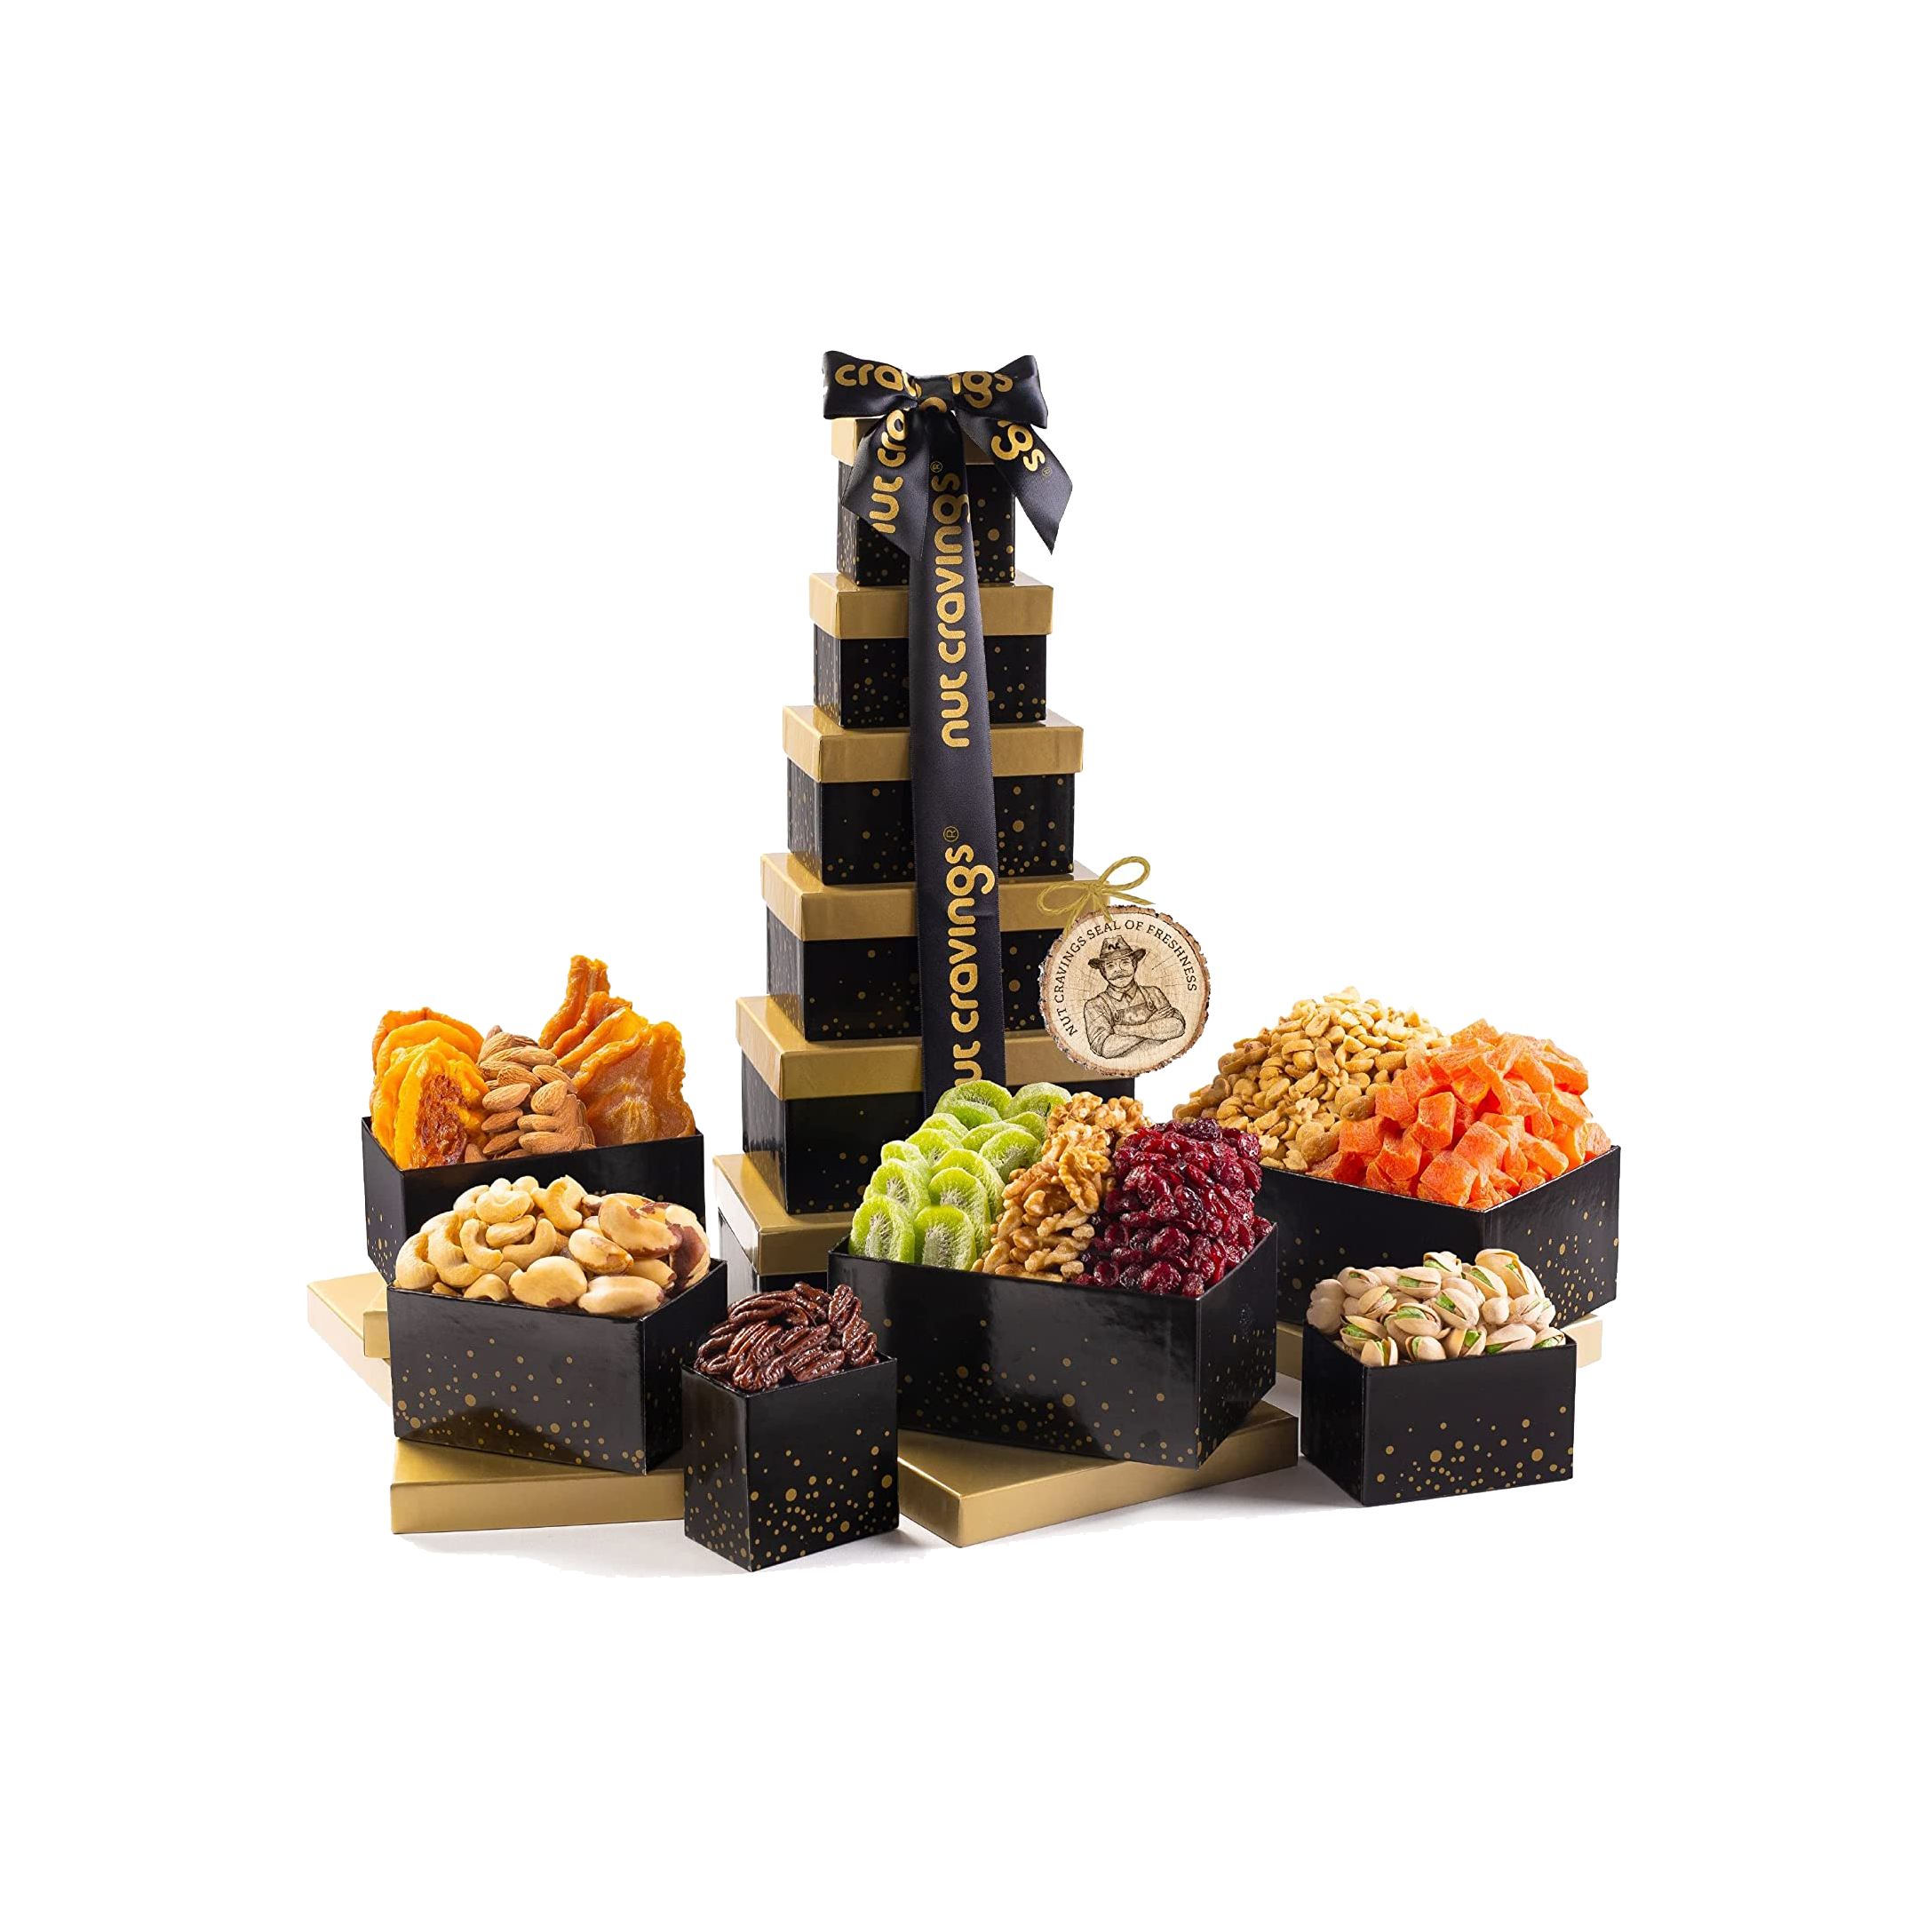 Savory Dried Fruit & Nut Snack Set – gourmet gift baskets – US delivery -  Good 4 You Gift Baskets USA